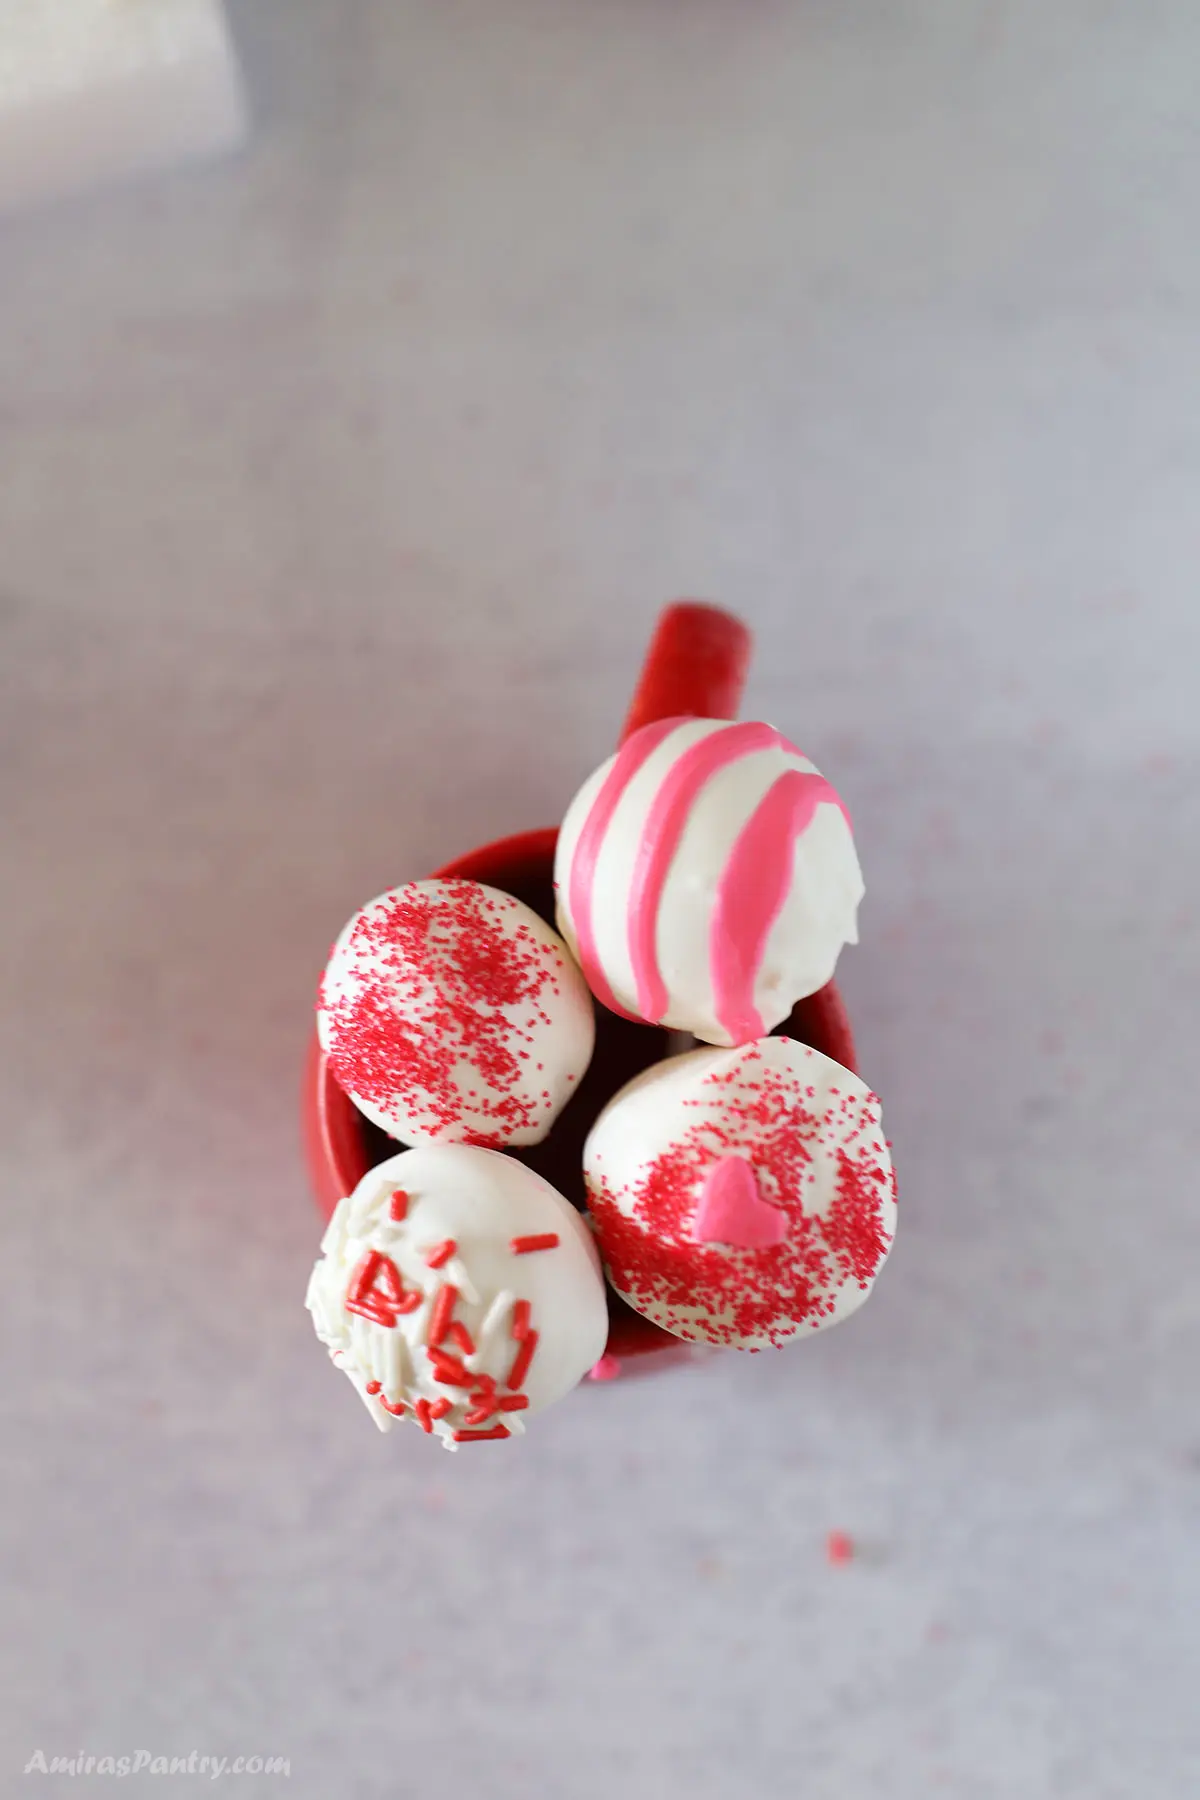 A top view of 4 strawberry cake pops on a red cup.